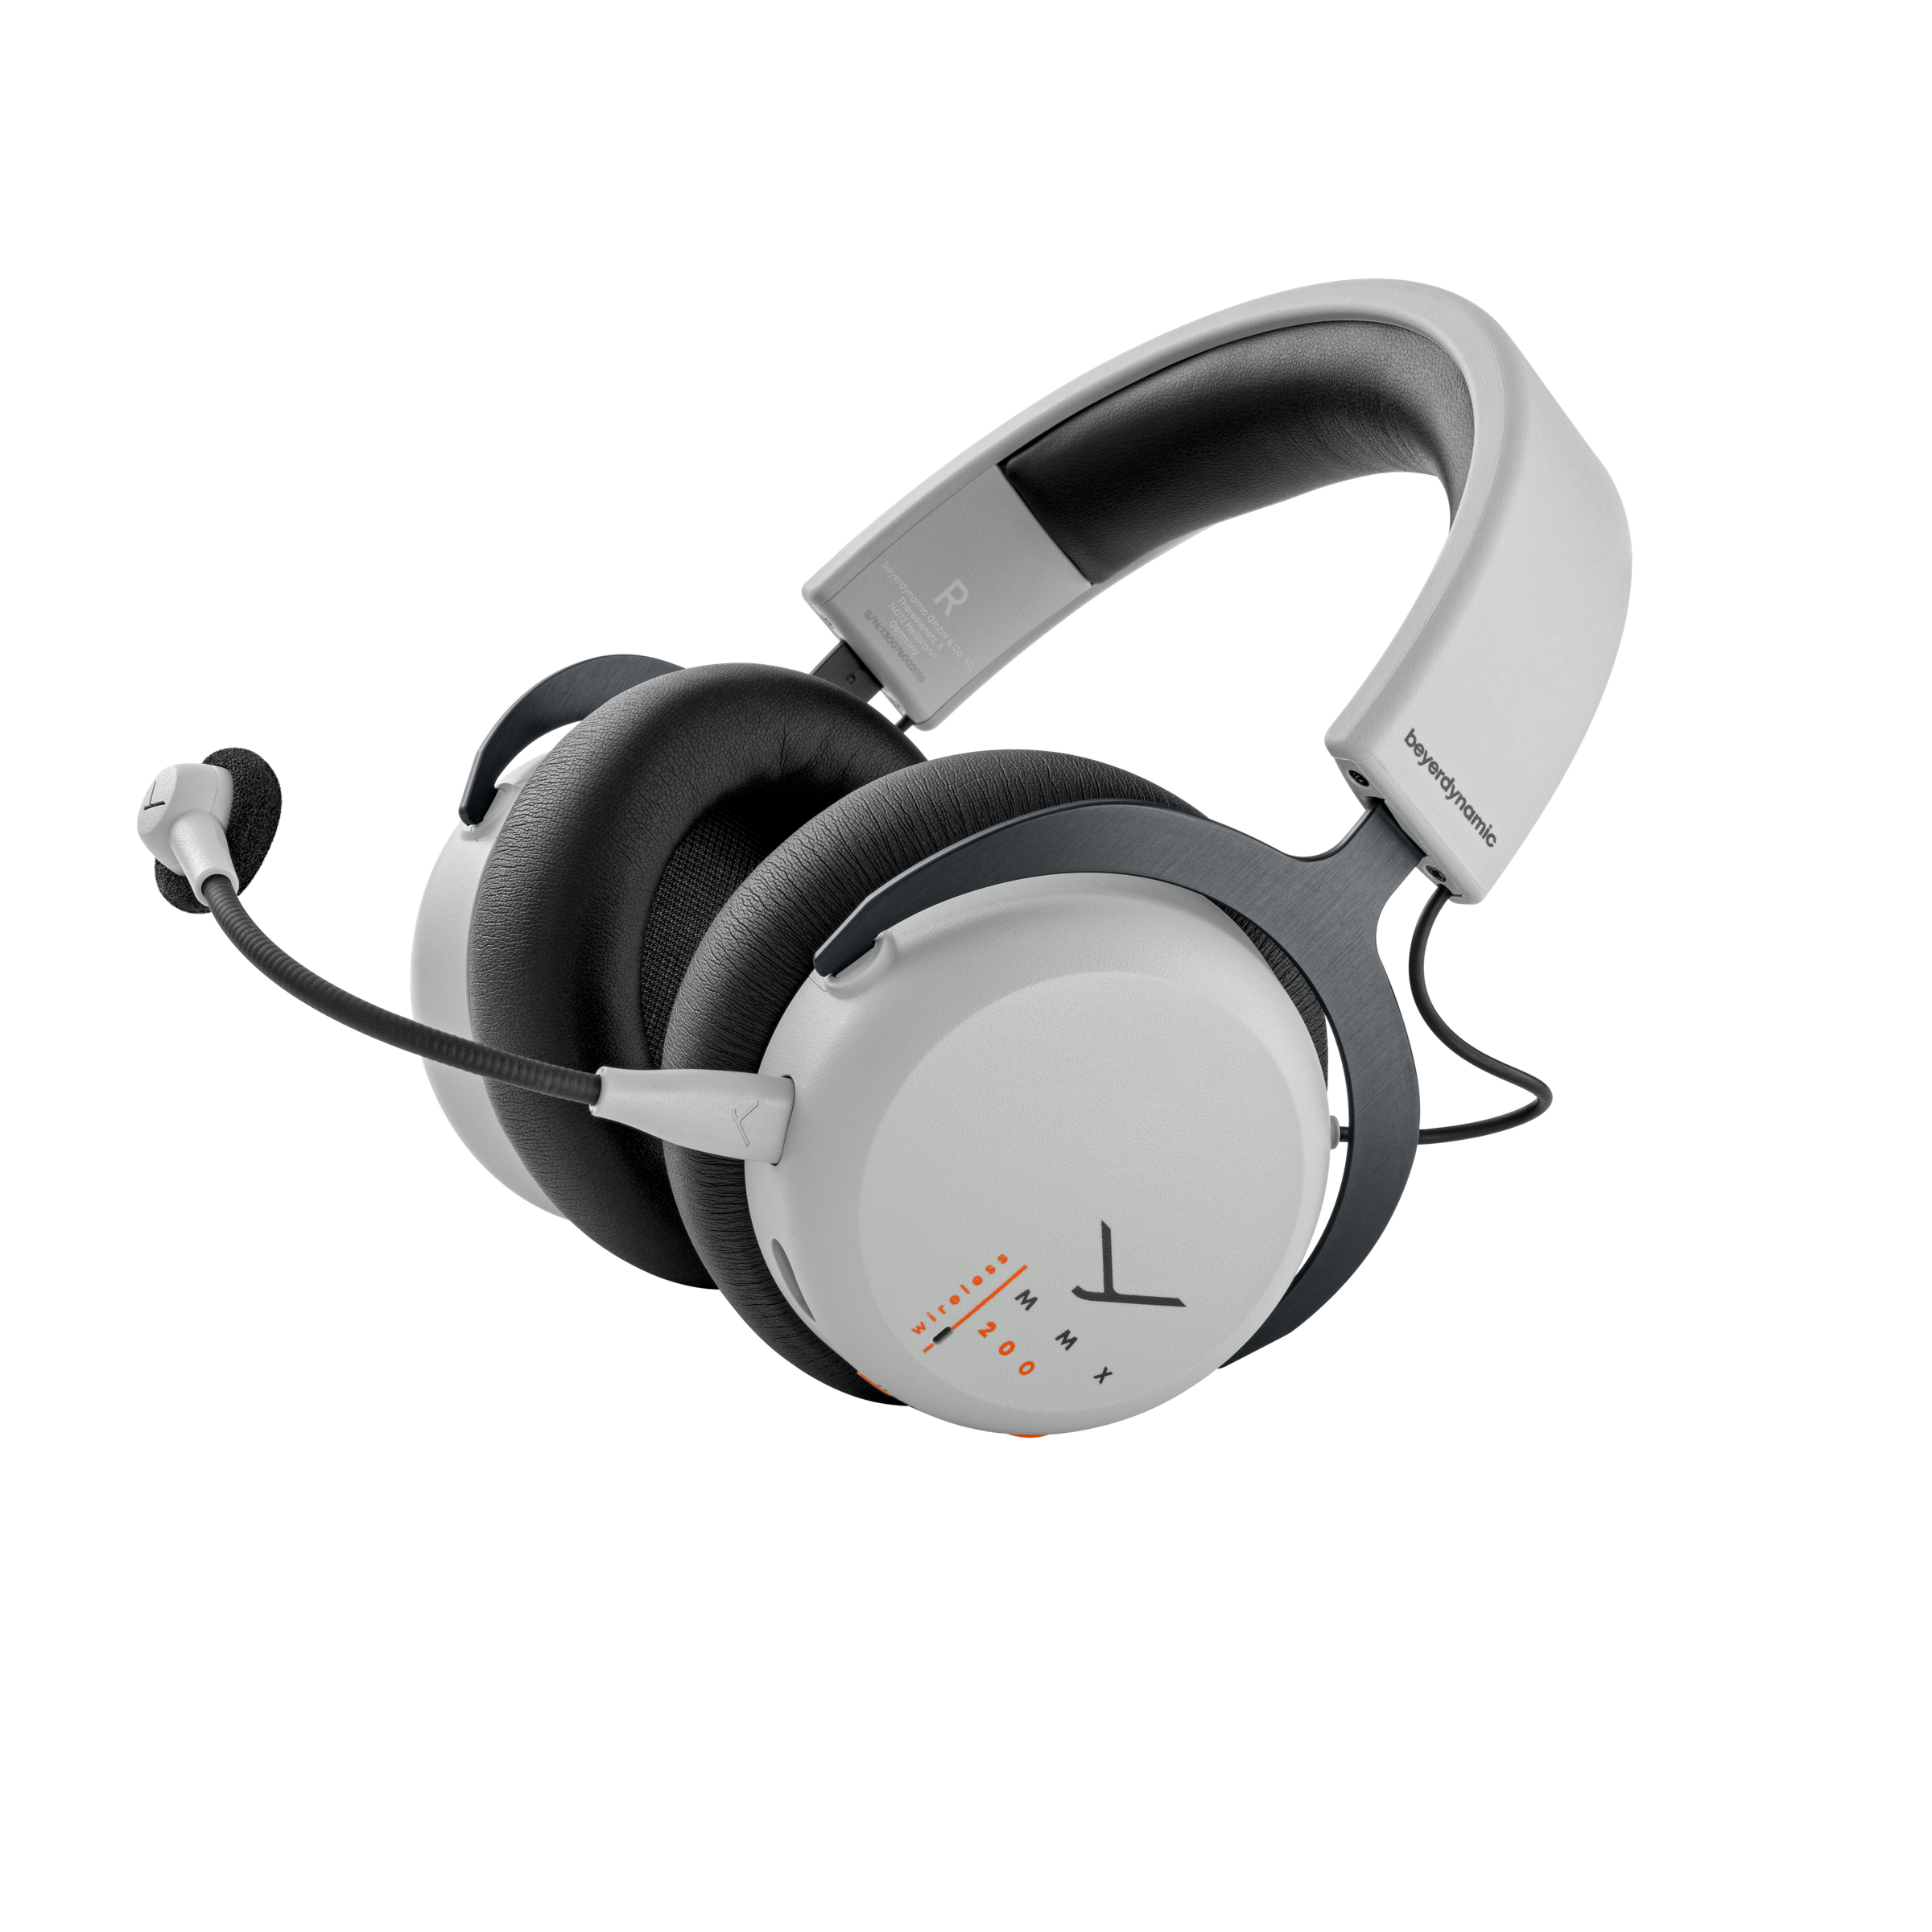 The Beyerdynamic MMX 200 wireless gaming headset in gray on a white background.